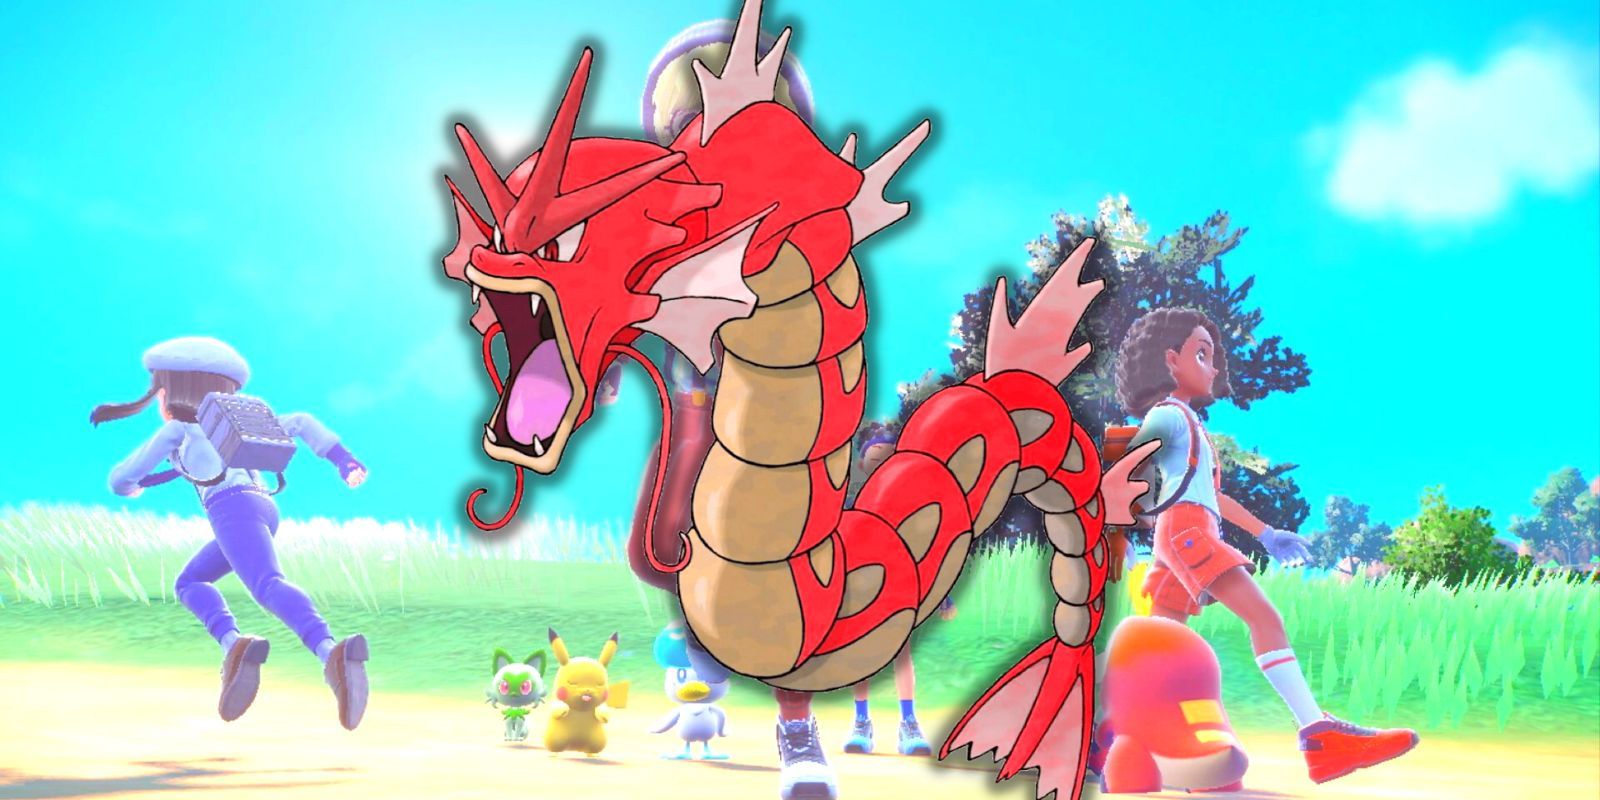 A shiny Garaydos layered on top of a sunny day in Pokemon Scarlet and Violet